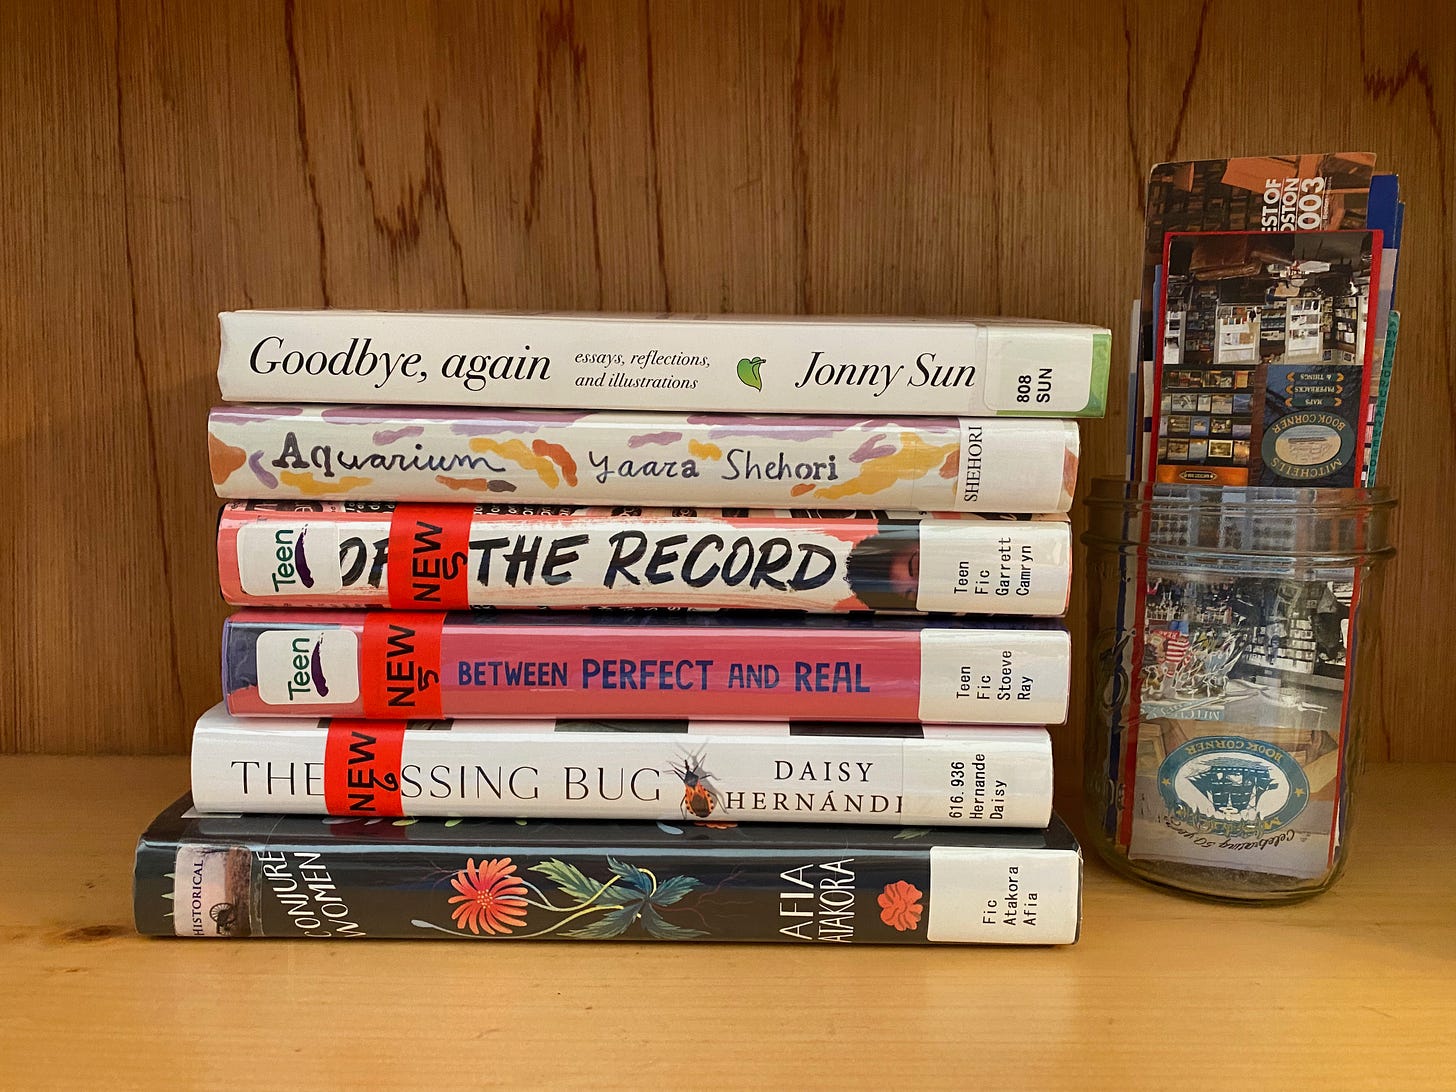 Closeup of a  stack of library books on a wooden shelf, sitting next to a jar of bookmarks. The books are: Conjure Women, The Kissing Bug, Between Perfect and Real, Off the Record, Aquarium, and Goodbye, Again.